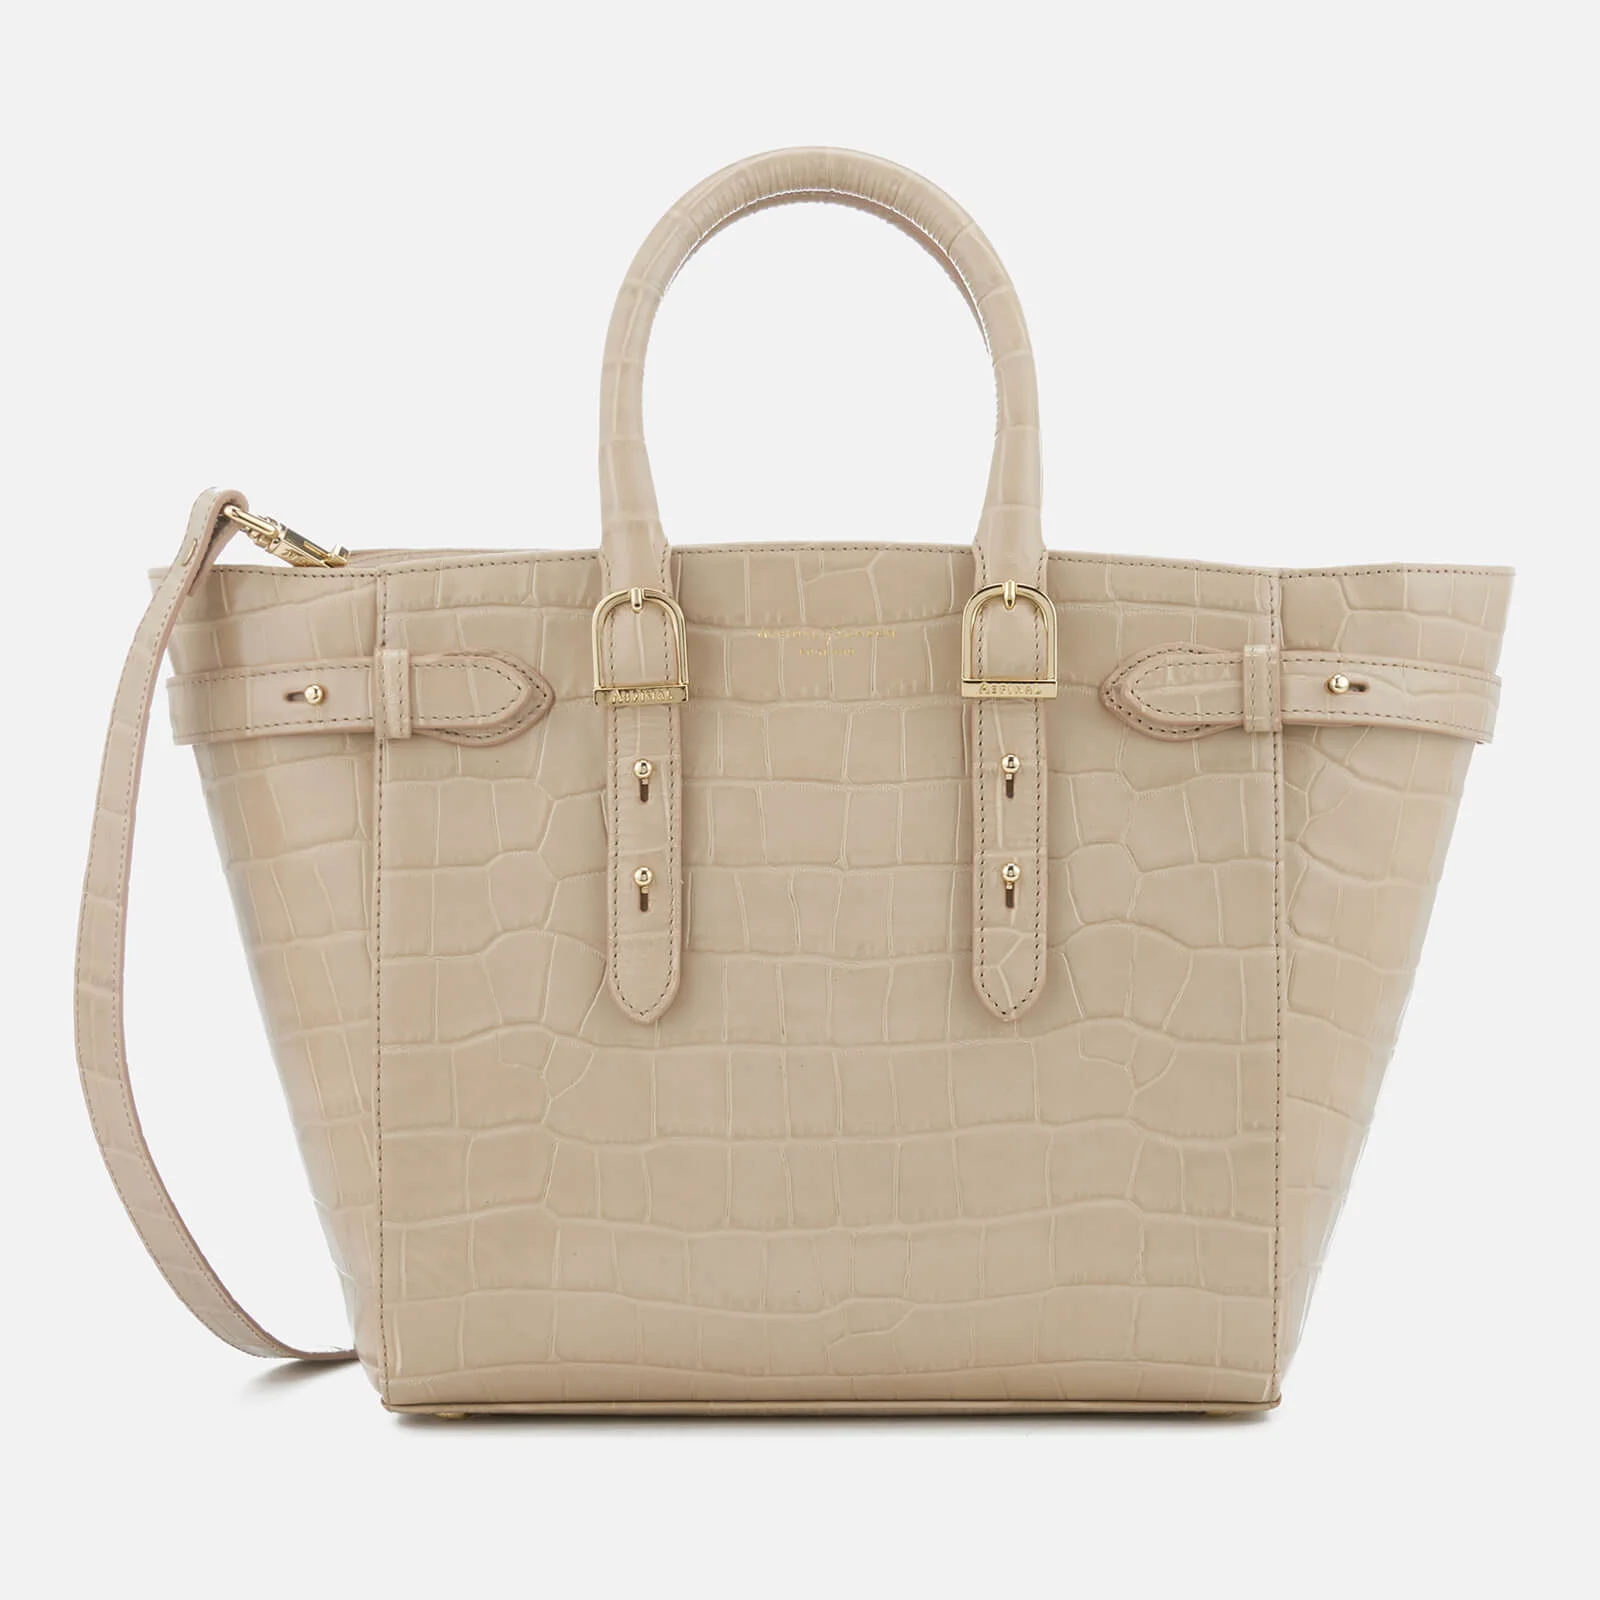 Aspinal of London Women's Marylebone Tote Bag - Soft Taupe Image 1